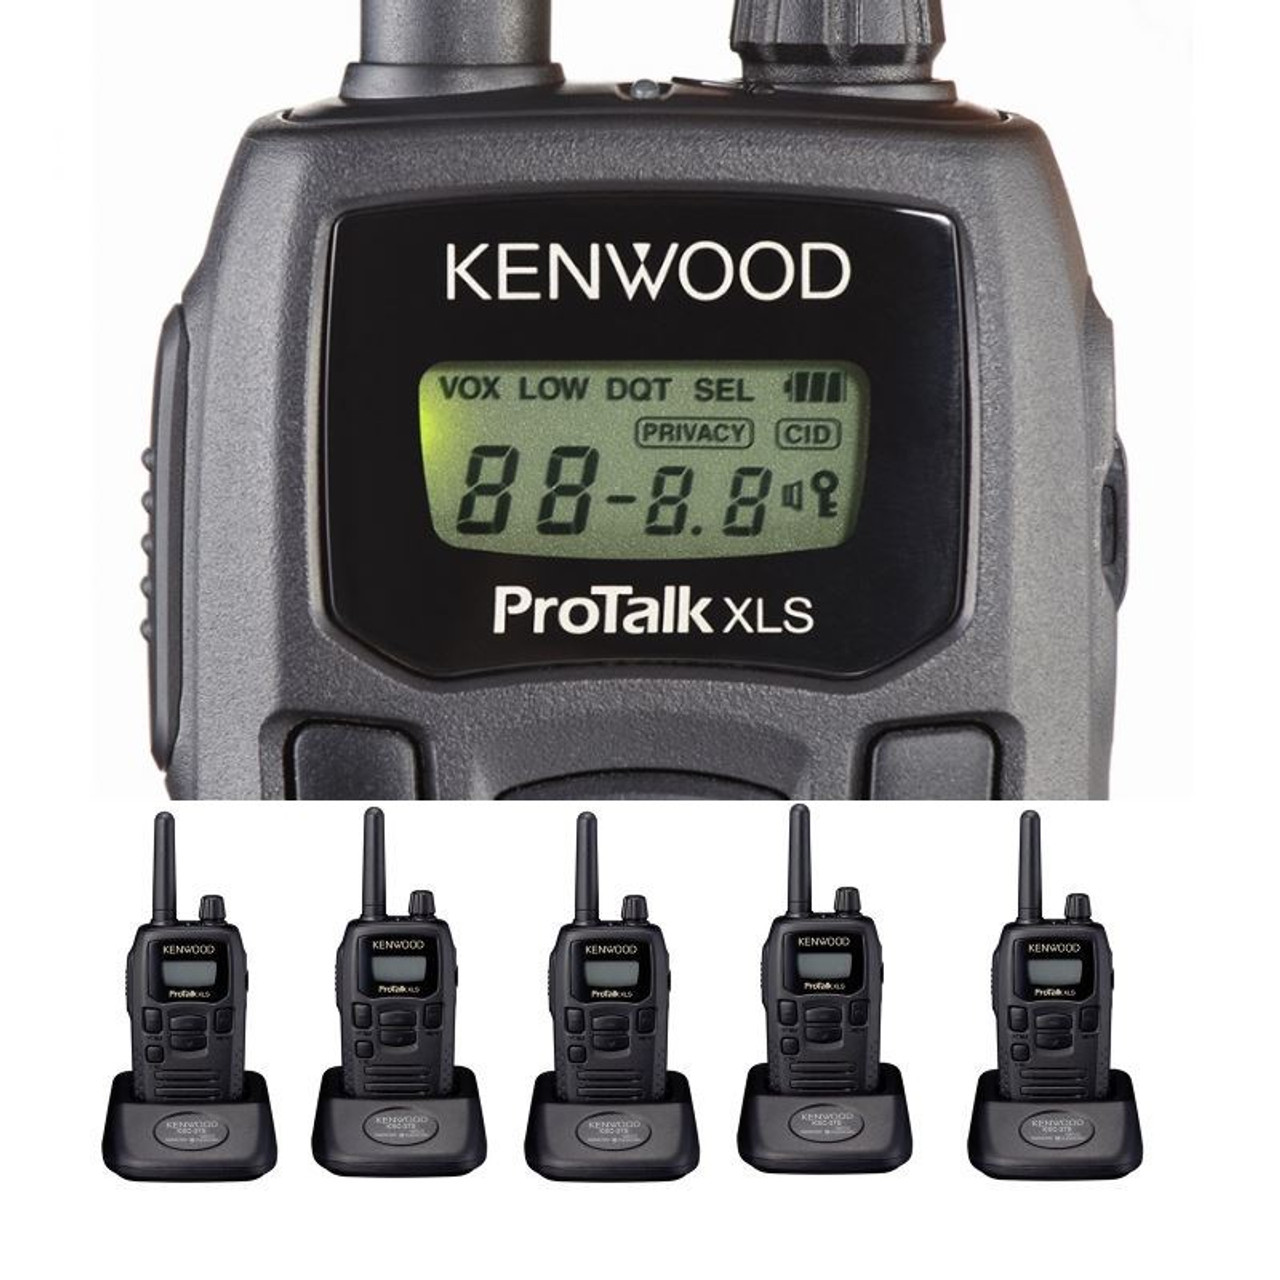 Kenwood ProTalk KBH-14 replacement belt clips XLS TK3230 Spring Action clip  fits 3230 radios. Free Shipping!